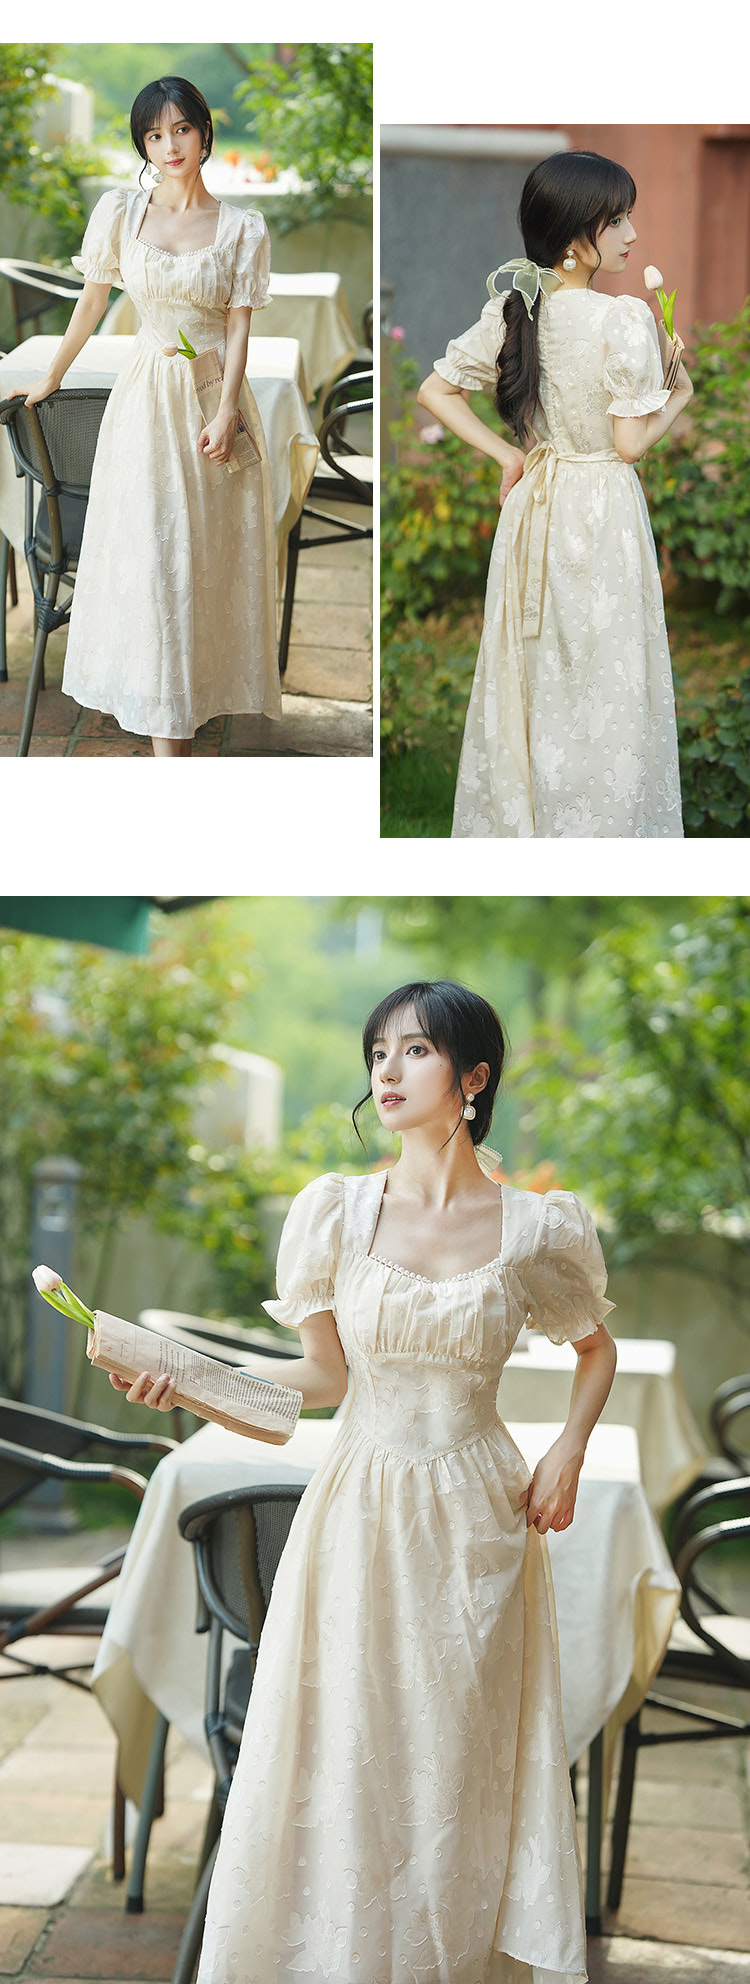 Modest-Sweet-Square-Neck-Short-Puff-Sleeve-Casual-Summer-Dress